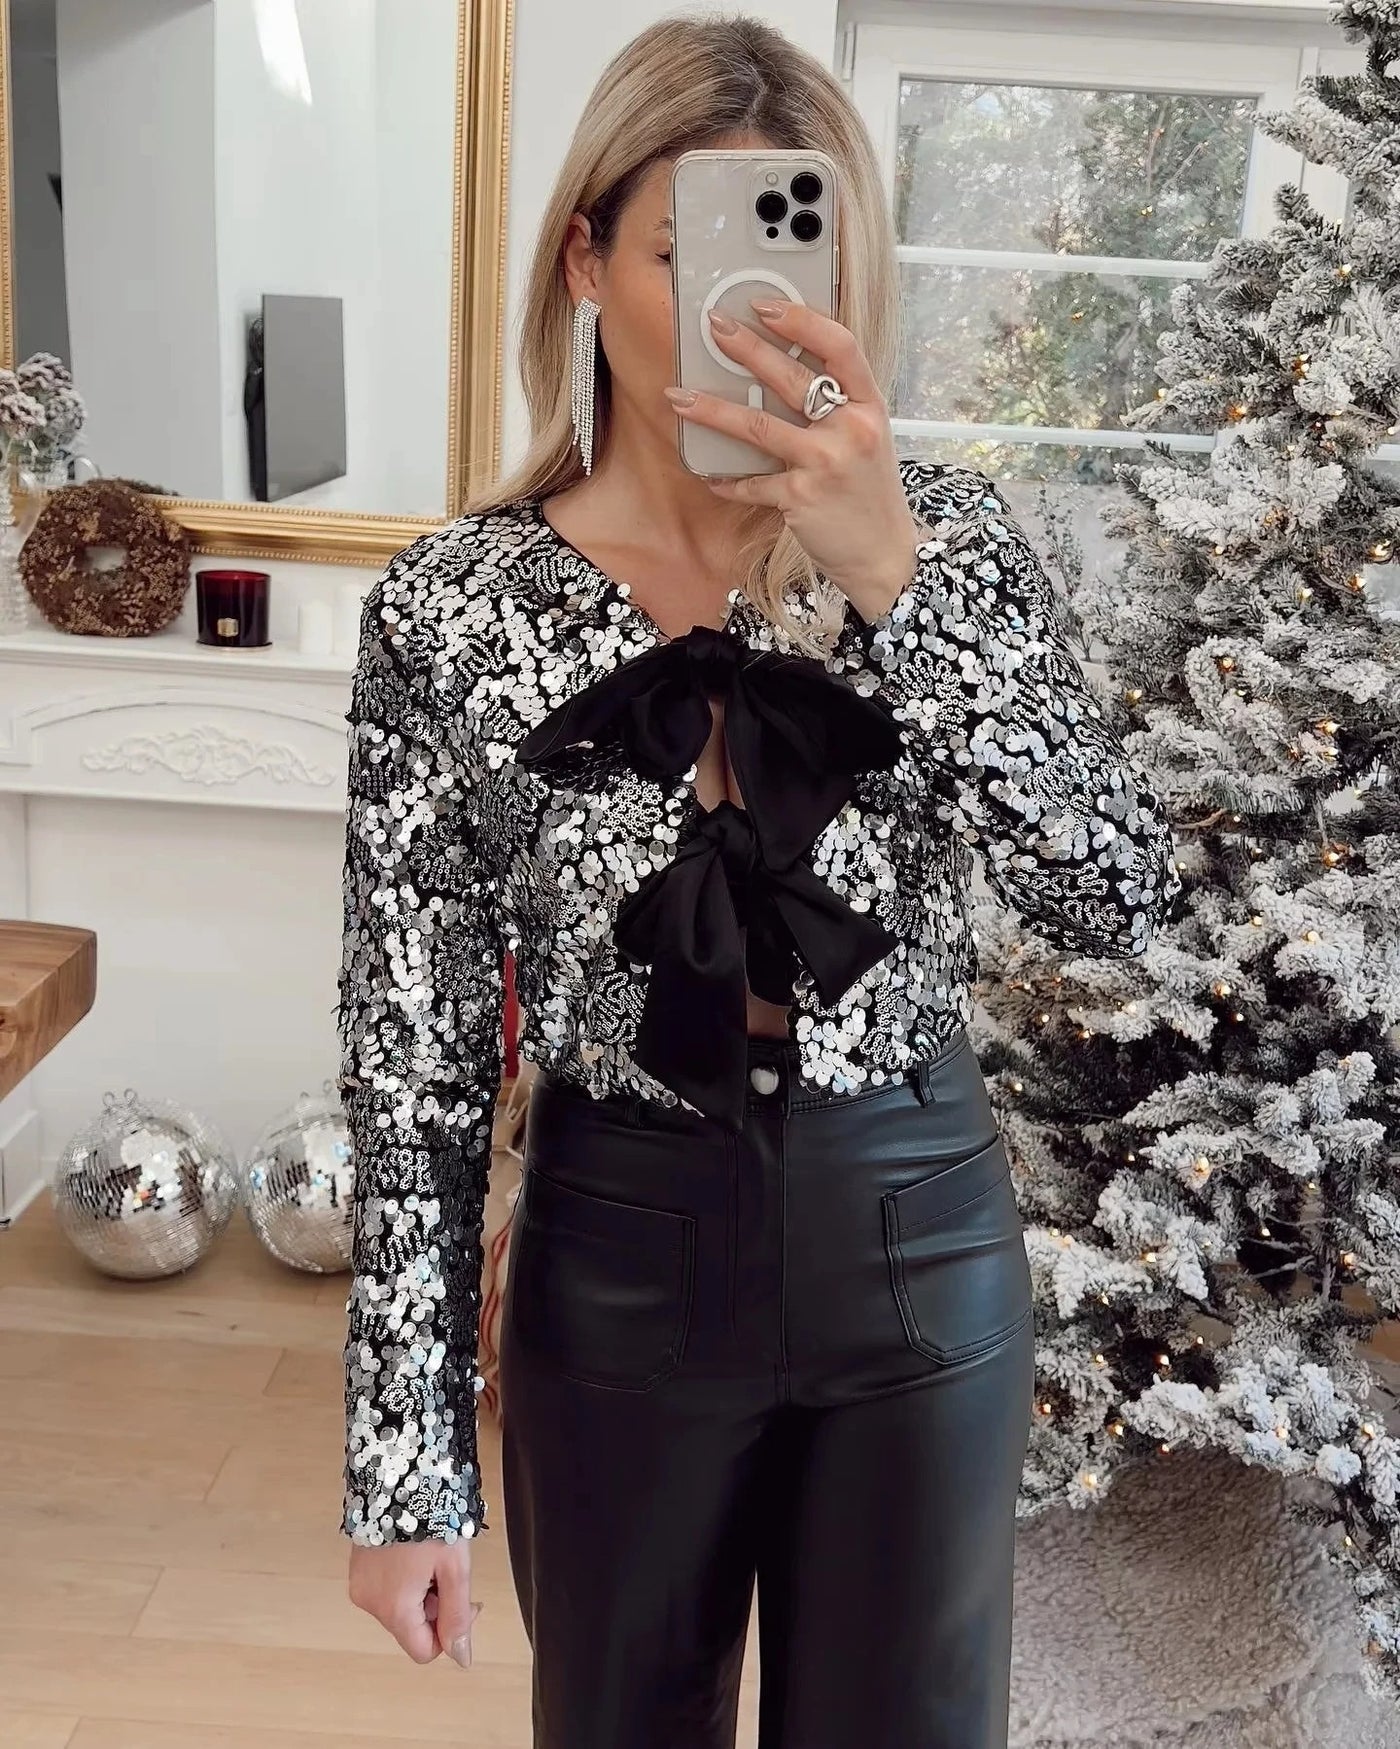 Fanciful Flair Bow Sequin Cropped Jacket Top